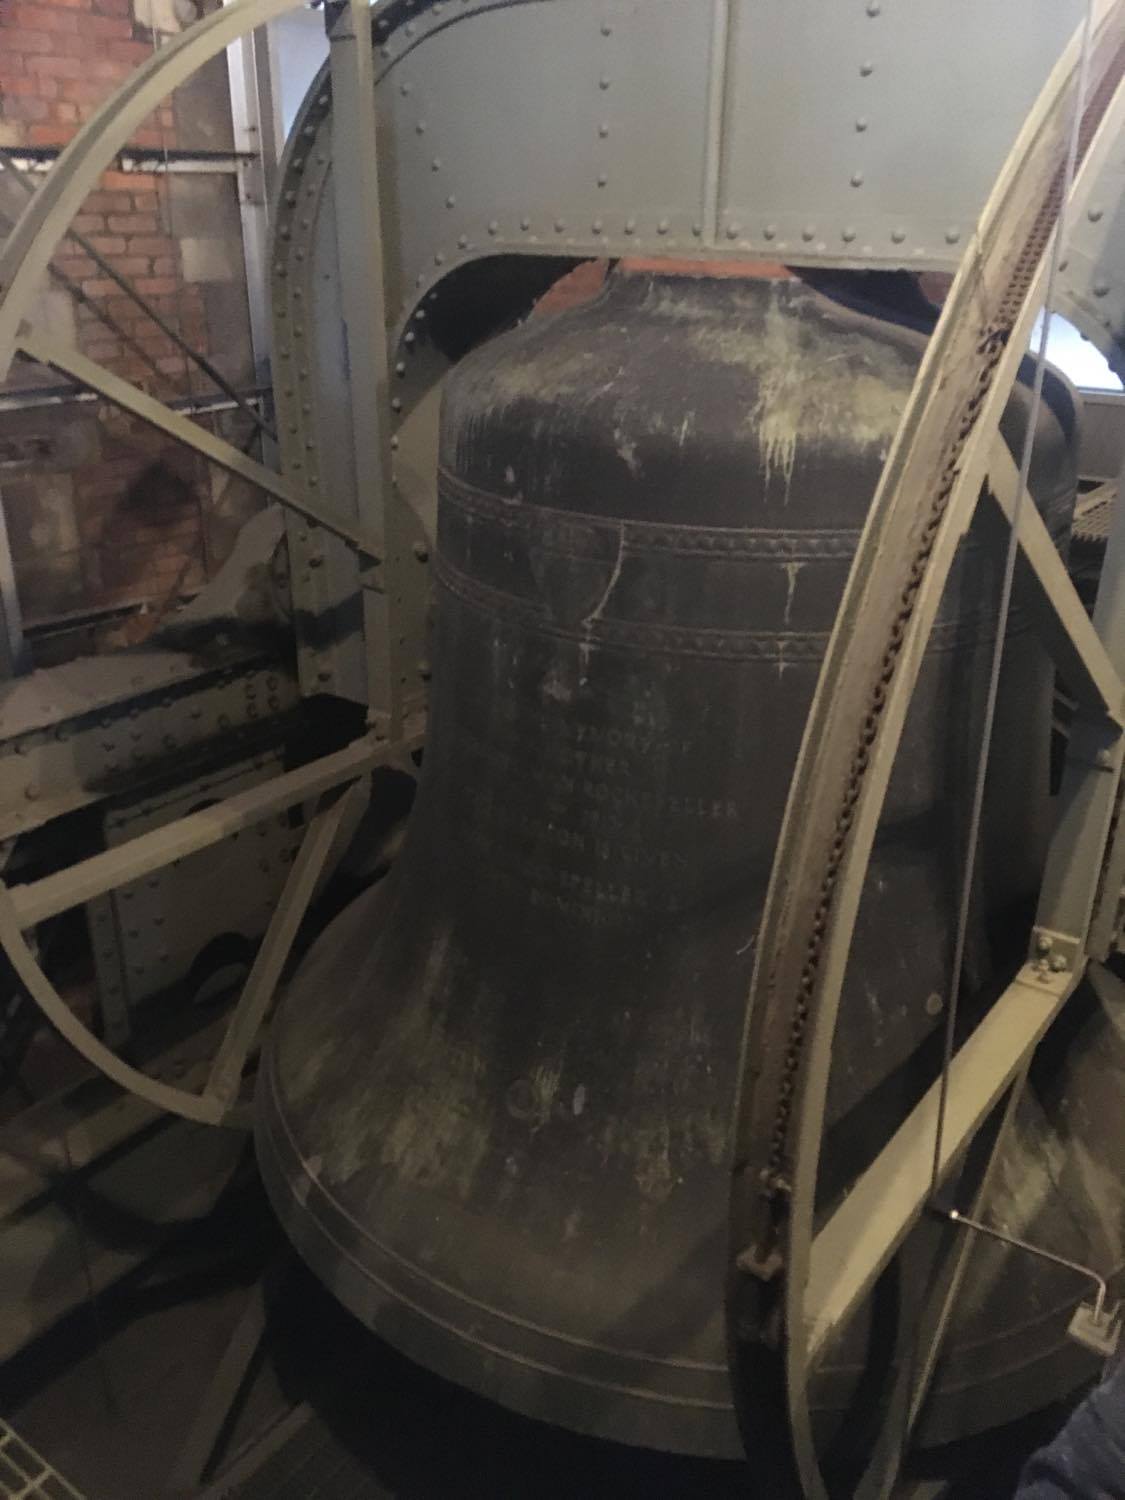 The 72nd bell of the carillon, which is also the largest one.